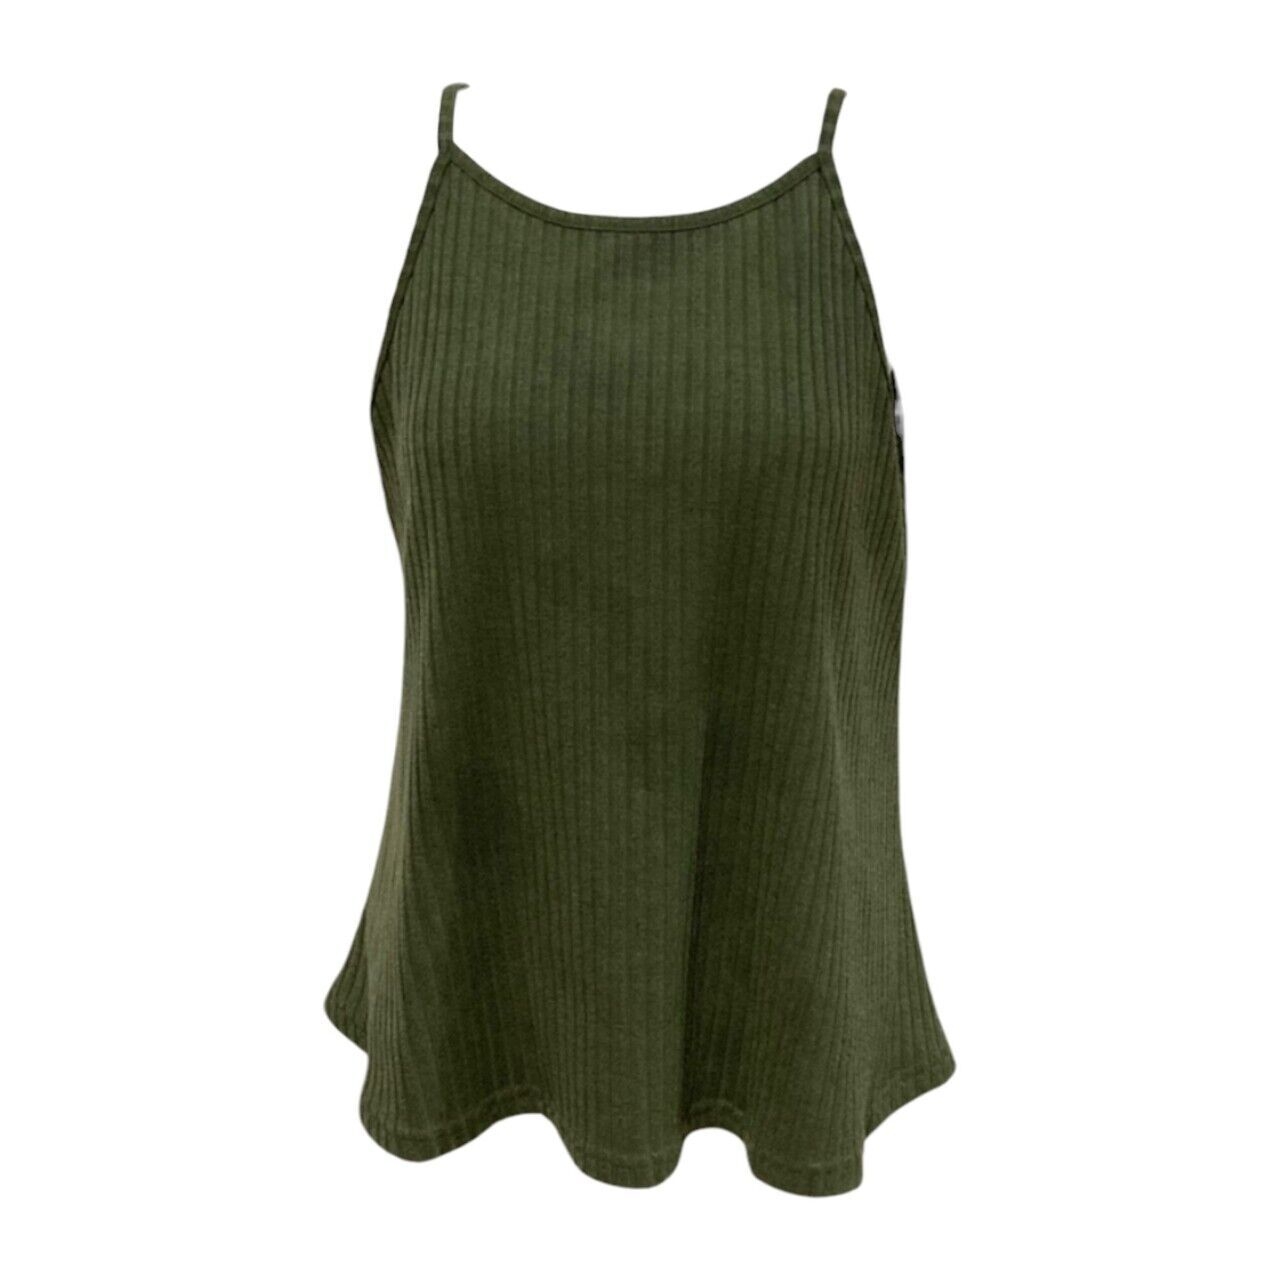 This Is April Green Sleeveless